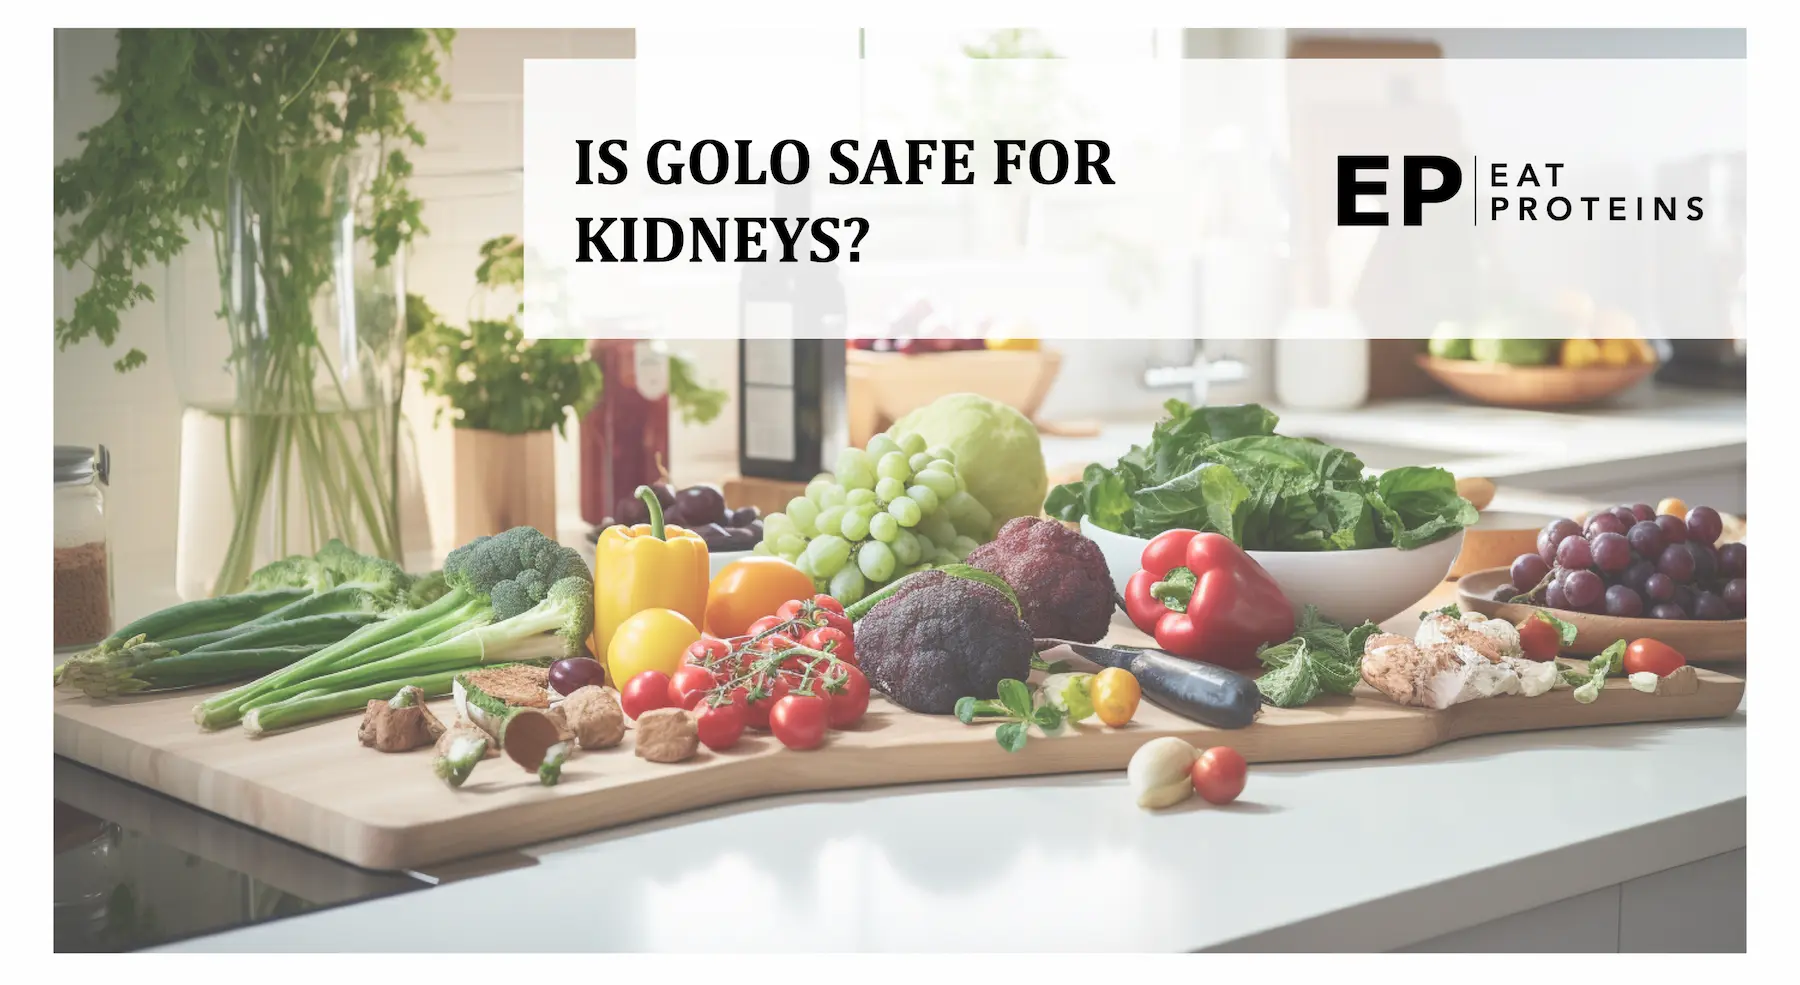 GOLO and kidney safety